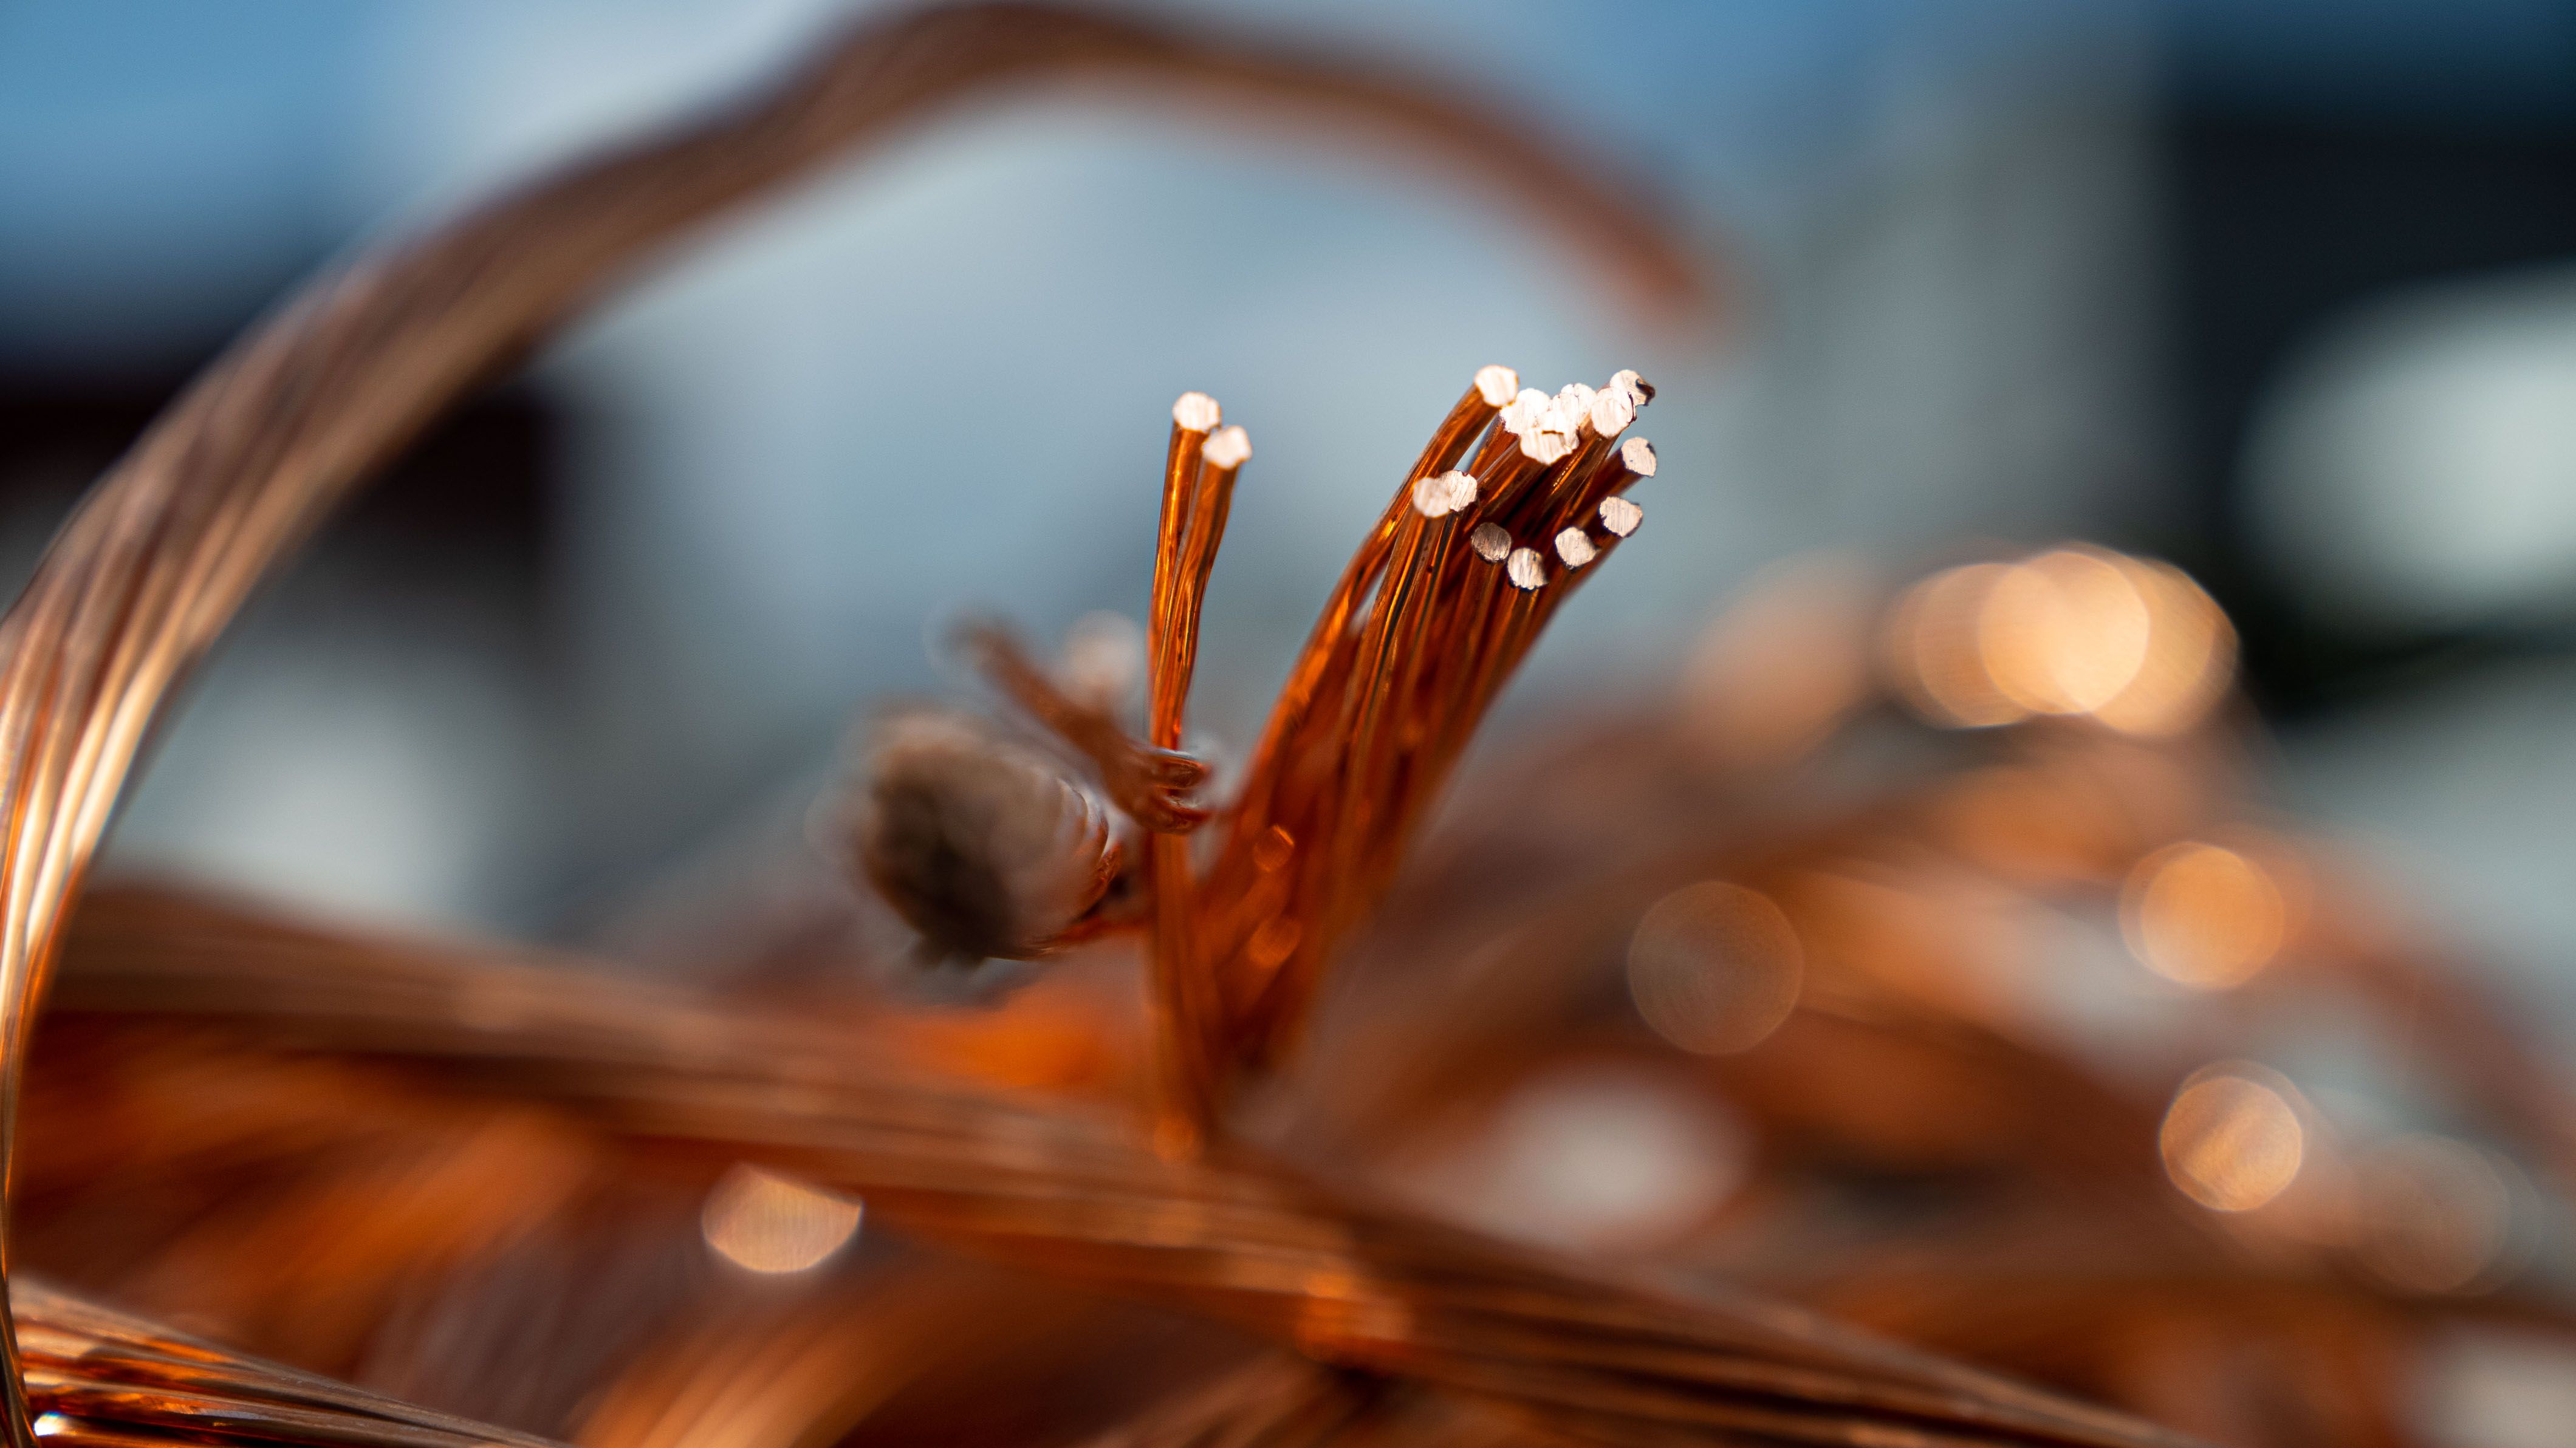 This image shows a cluster of copper wires